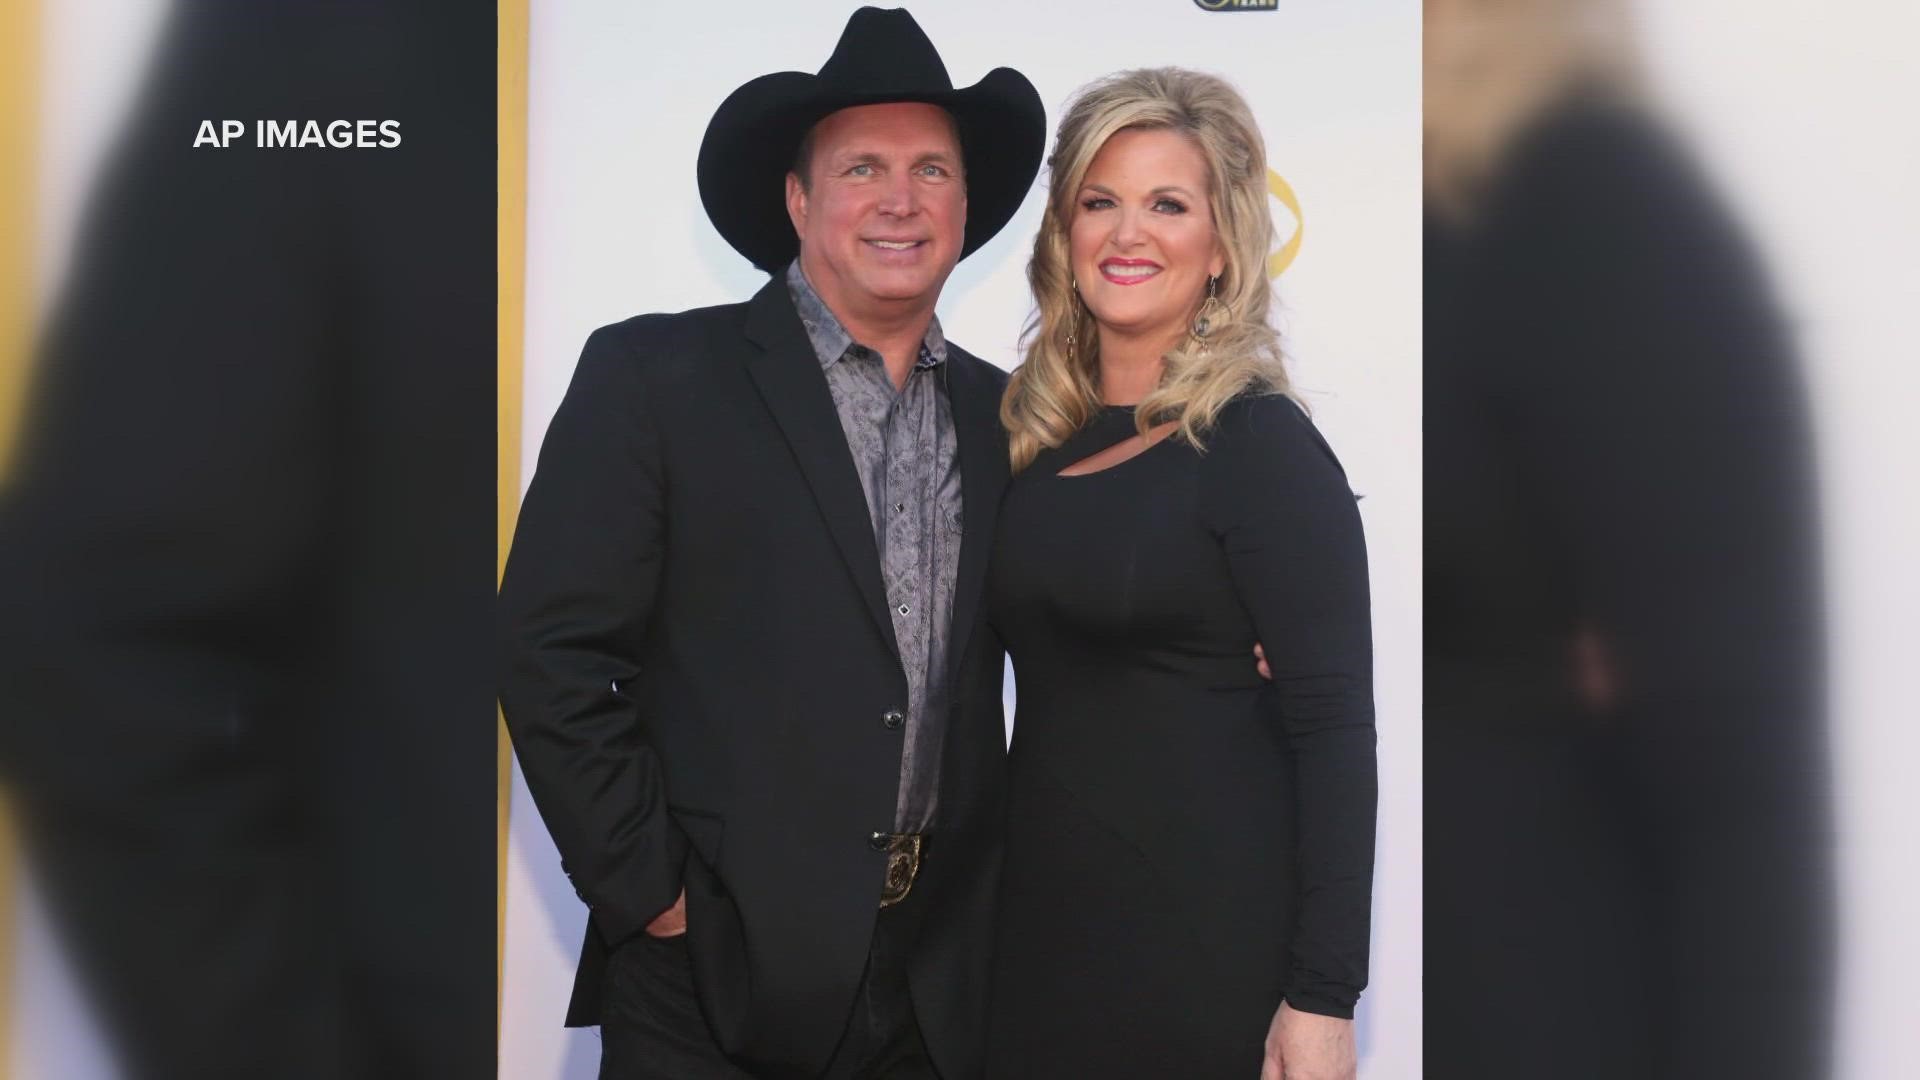 Garth Brooks and Trisha Yearwood will be in the Queen City to host the 2023 Carter Work Project to support Habitat for Humanity.